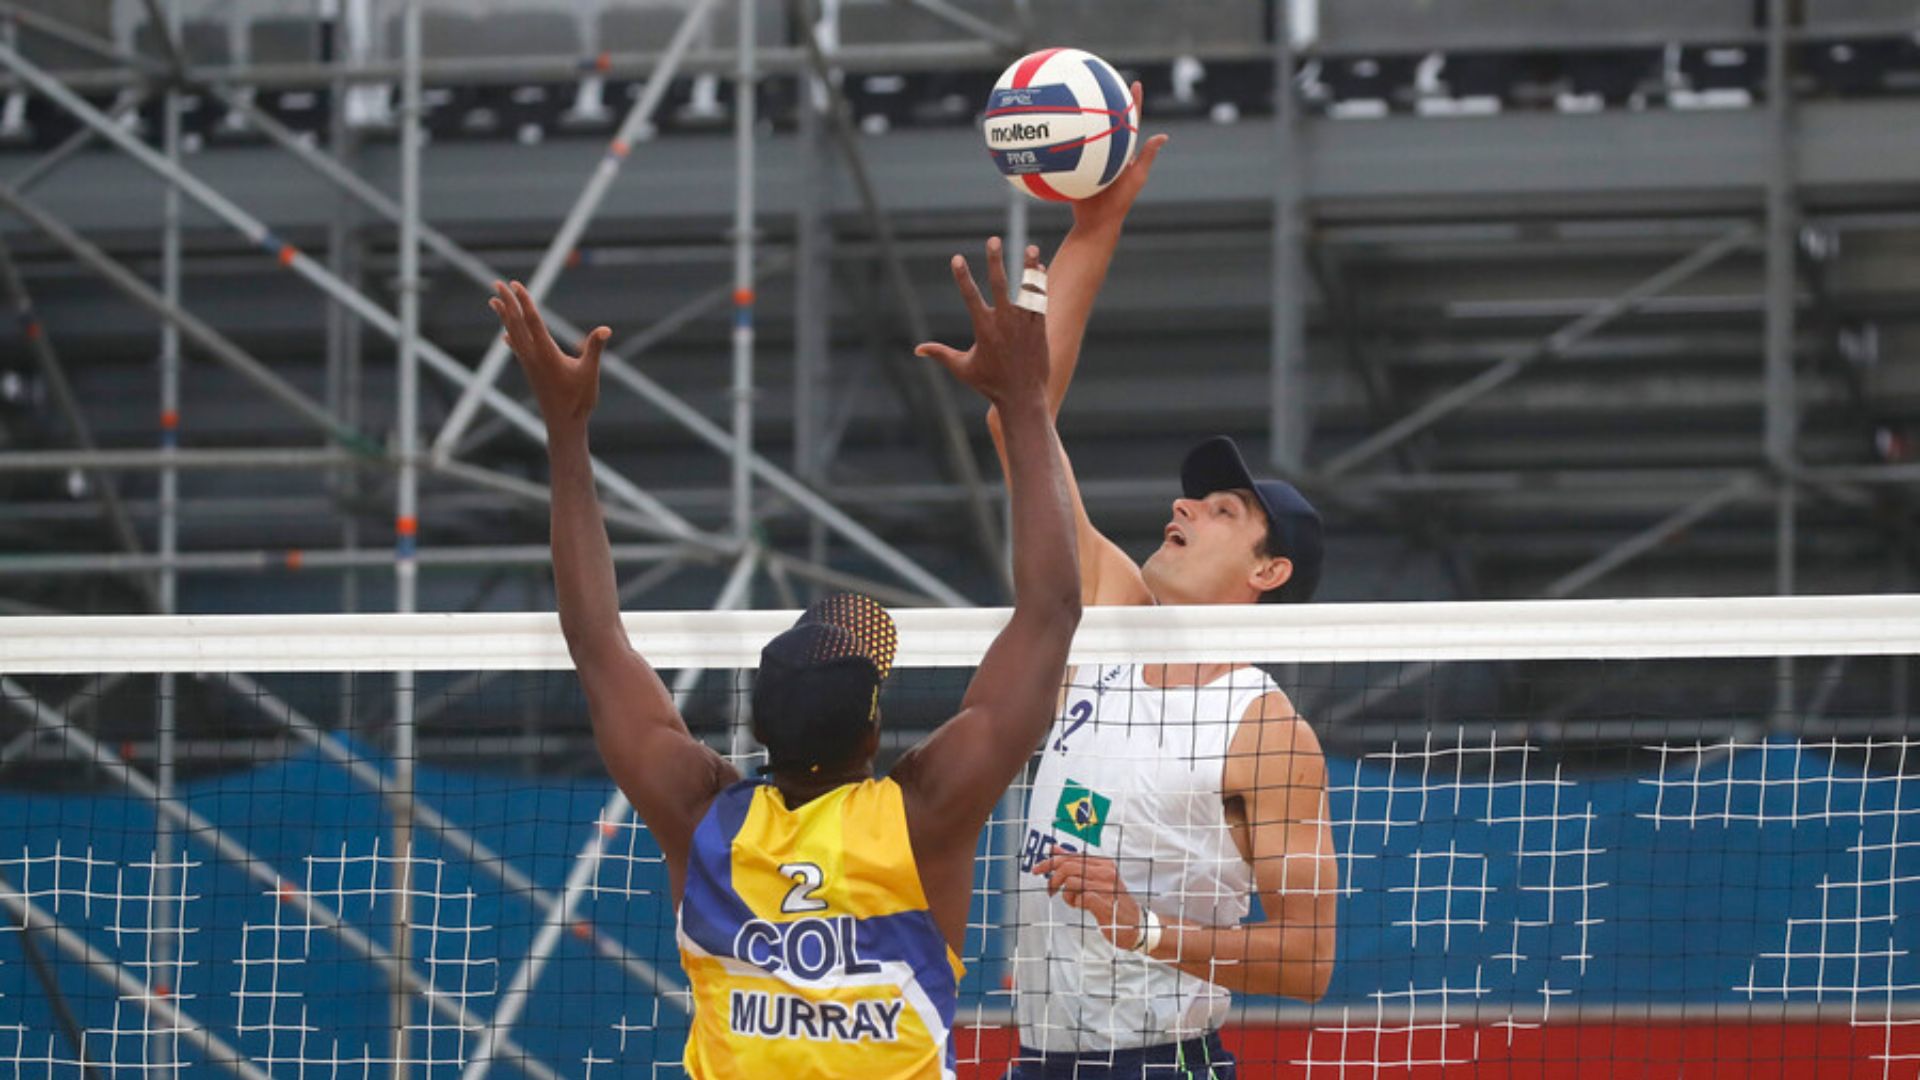 Brazilians Loyola, Souto continue unstoppable in beach volleyball